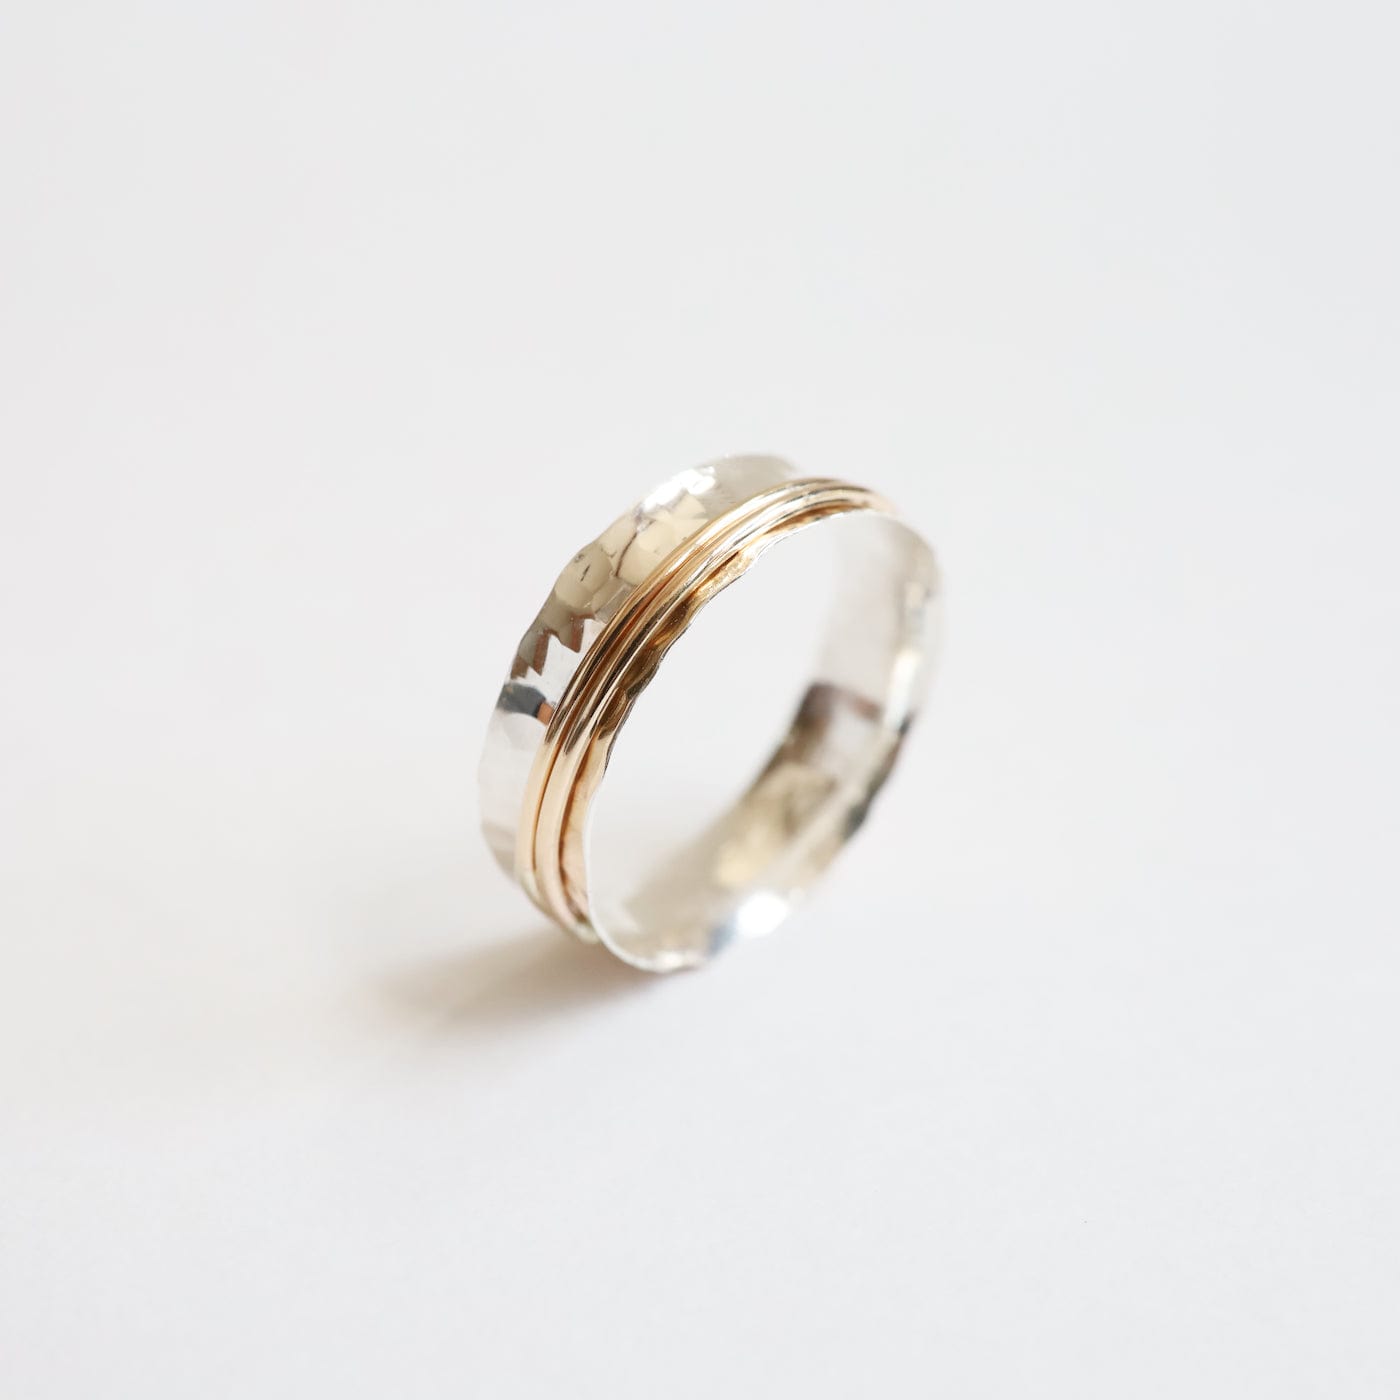 RNG-GF Hammered Sterling Silver Ring with Gold Filled Spinning Bands